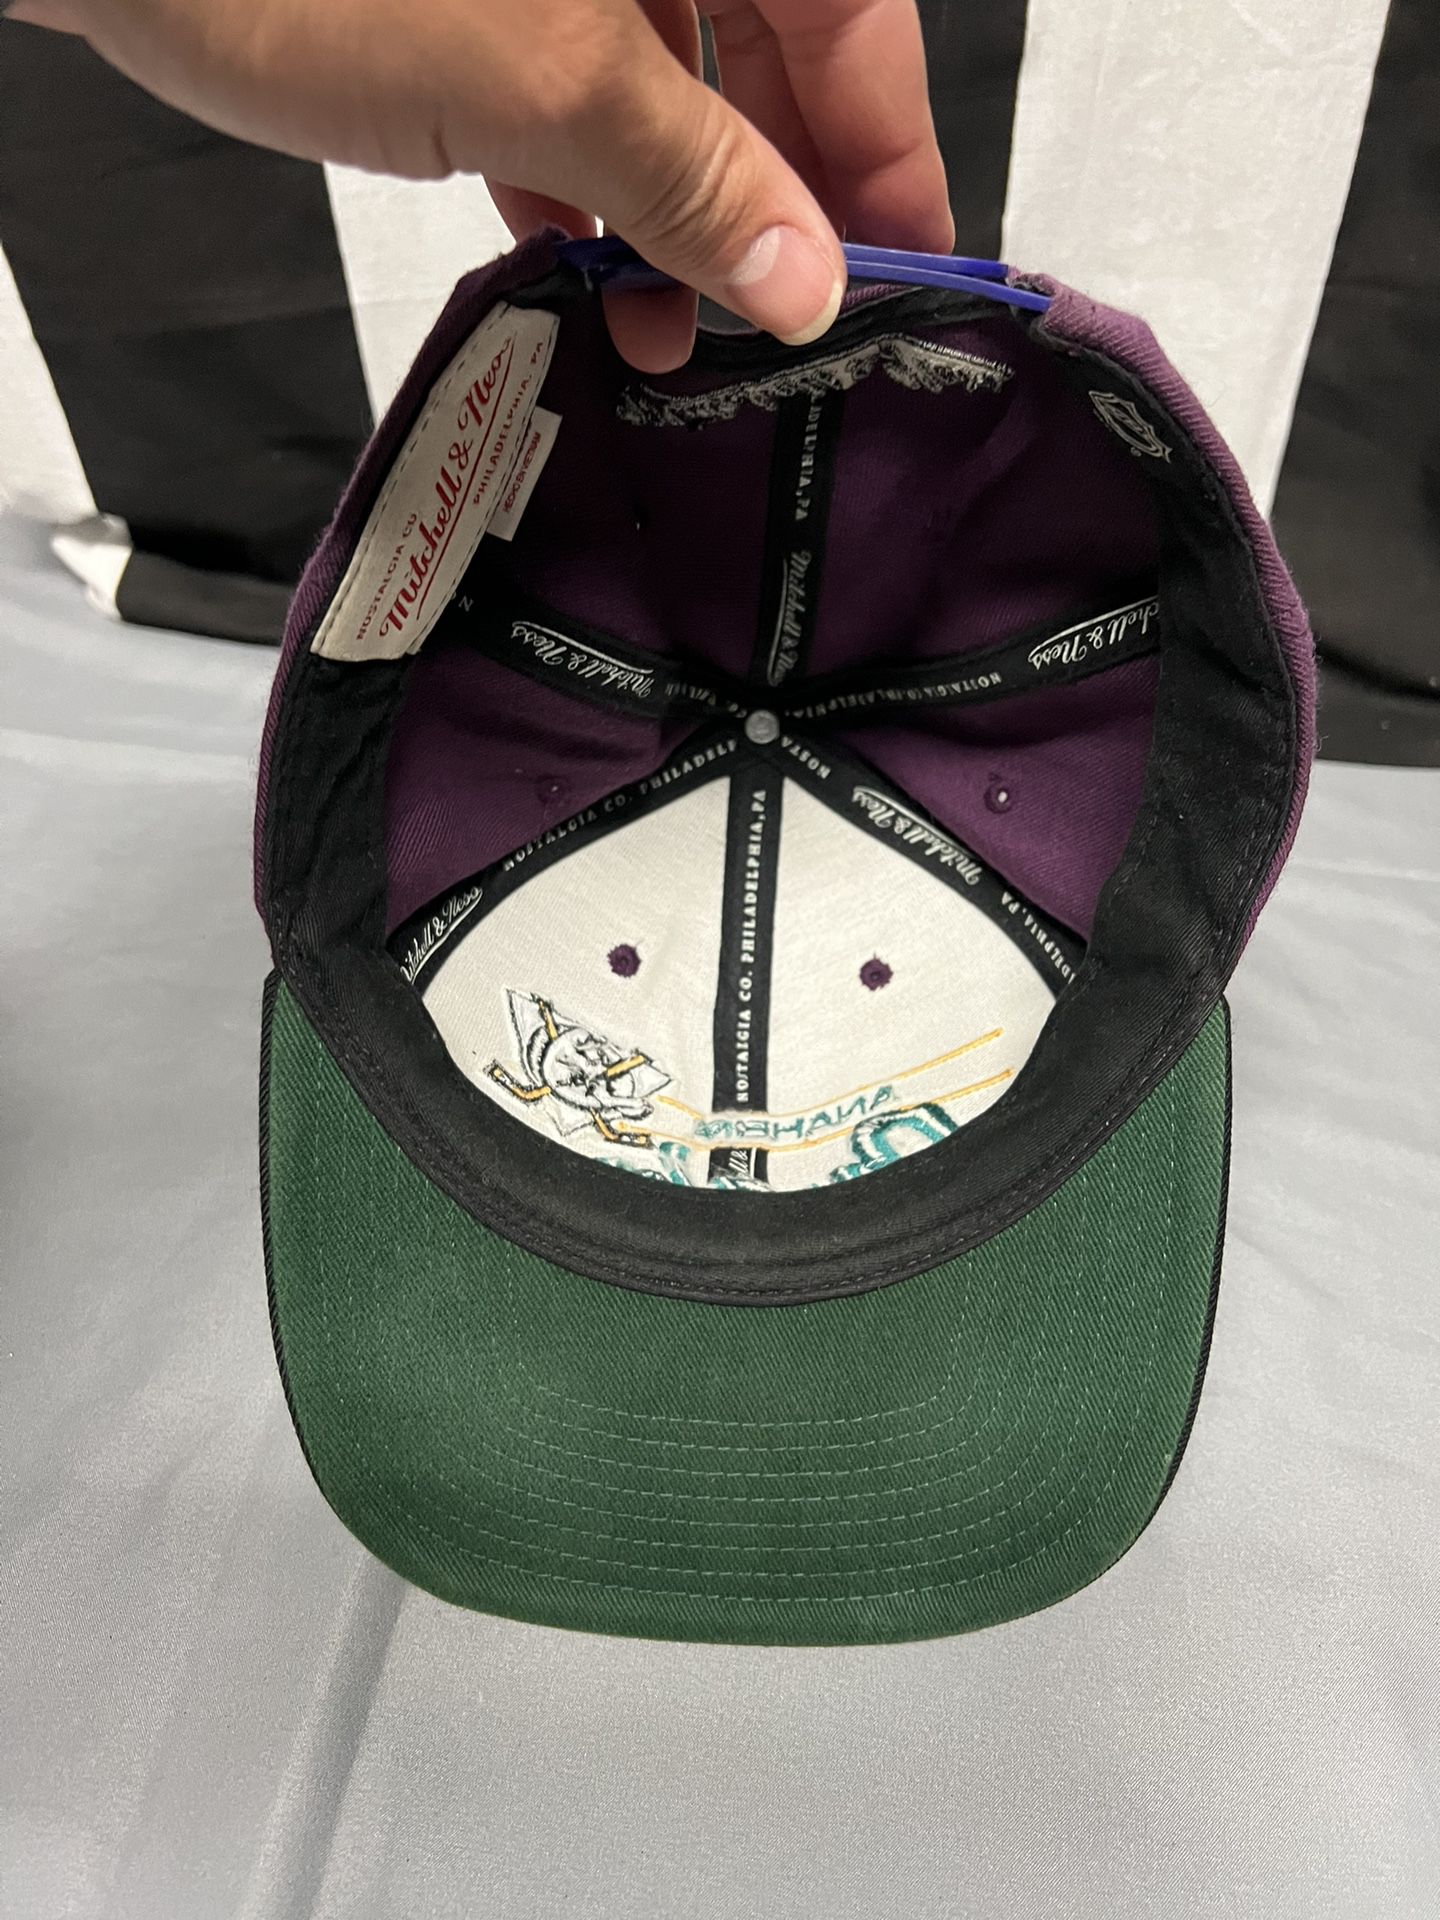 VIntage Anaheim Mighty Ducks Snapback Hat Competitor NHL Hockey Adjustable  Cap for Sale in San Ramon, CA - OfferUp